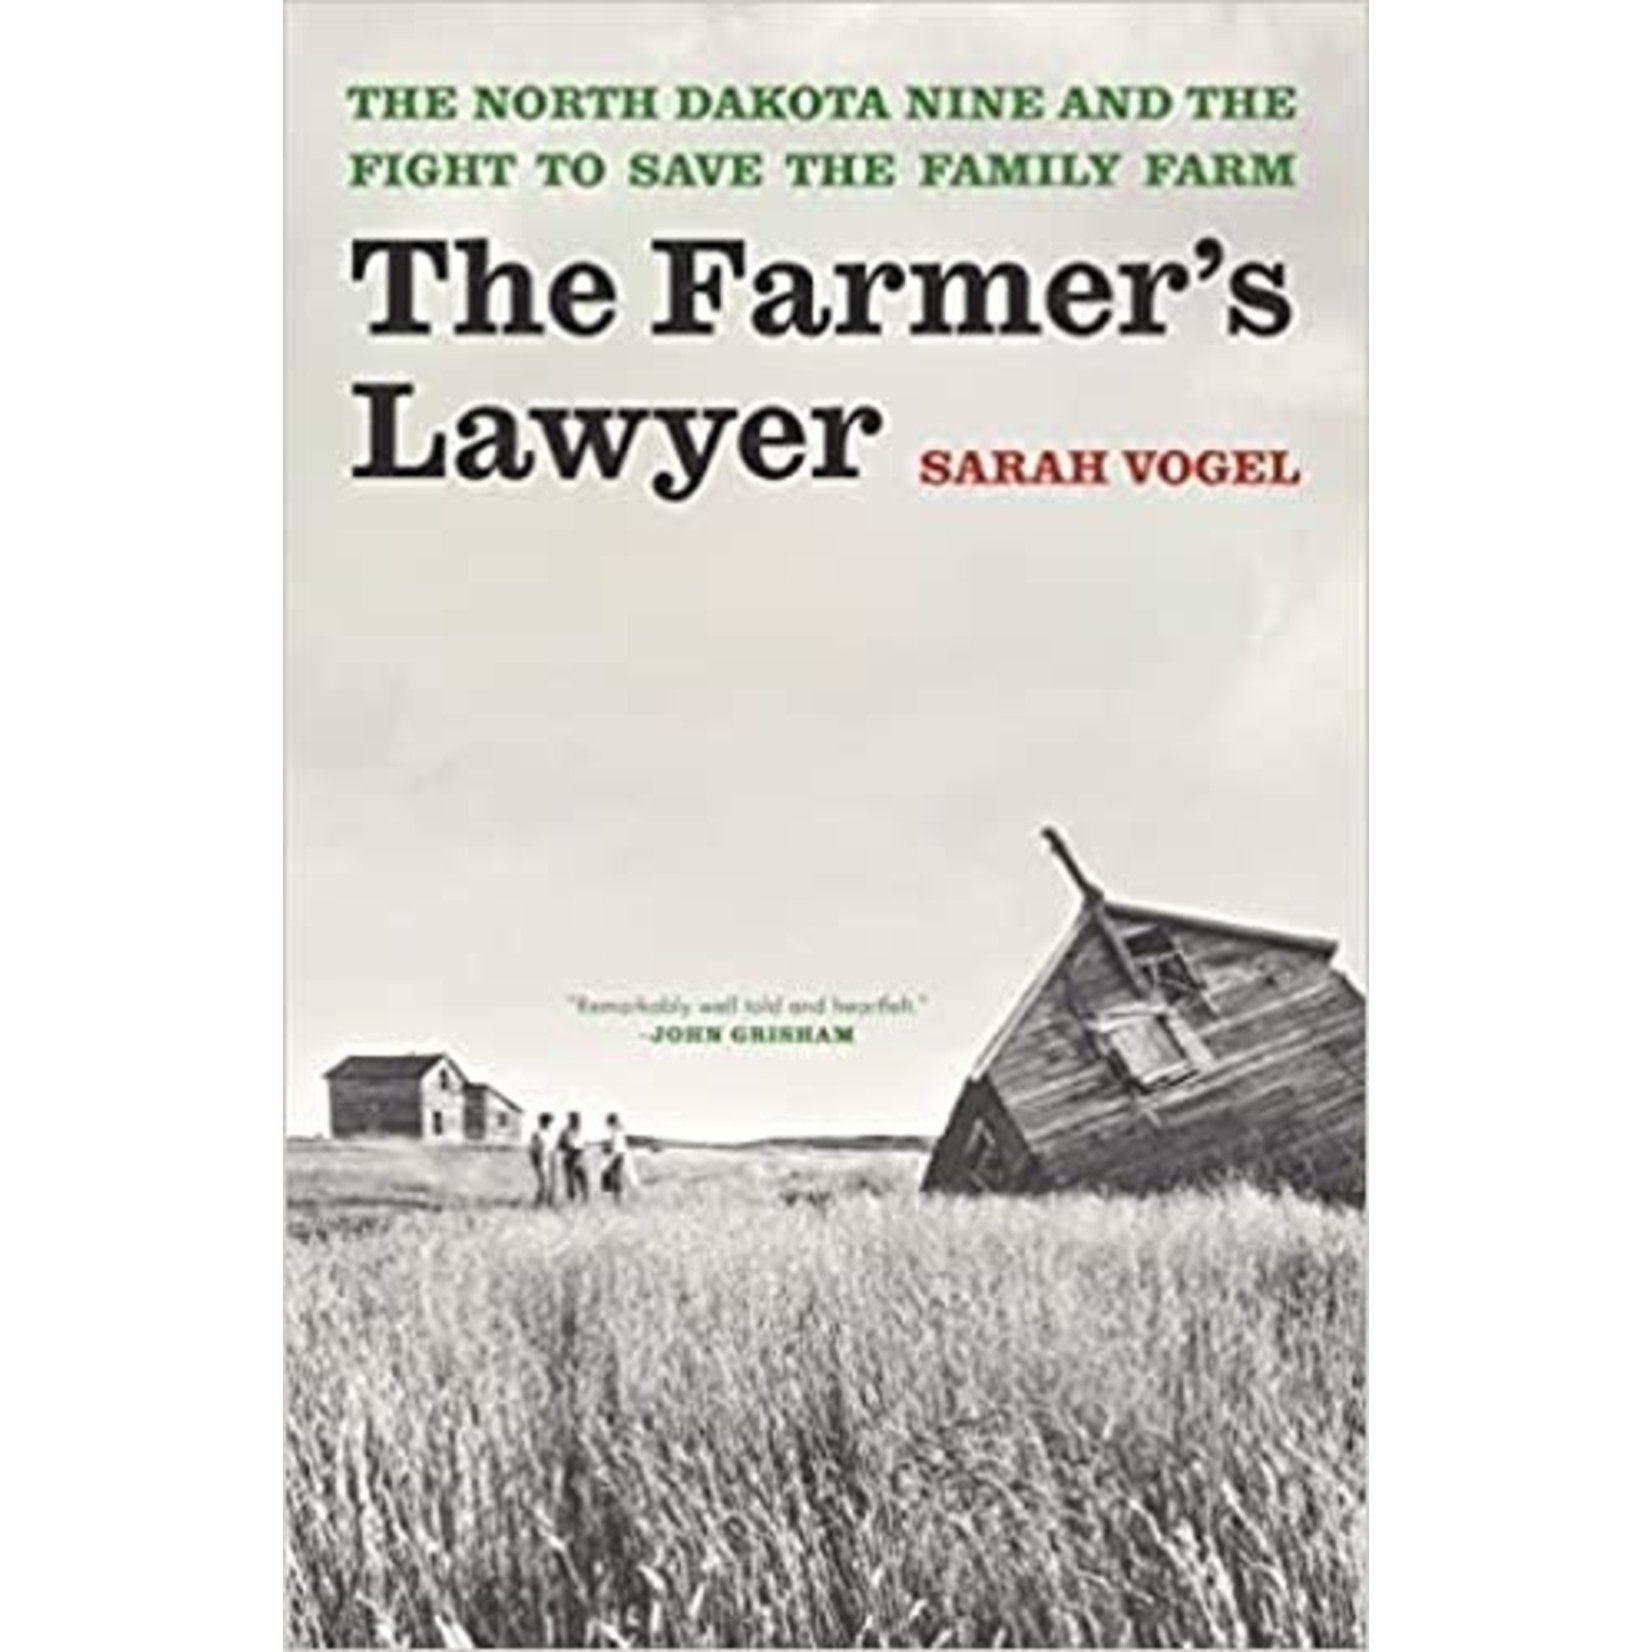 The Farmer's Lawyer: The North Dakota Nine and the Fight to Save the Family  Farm by Sarah Vogel